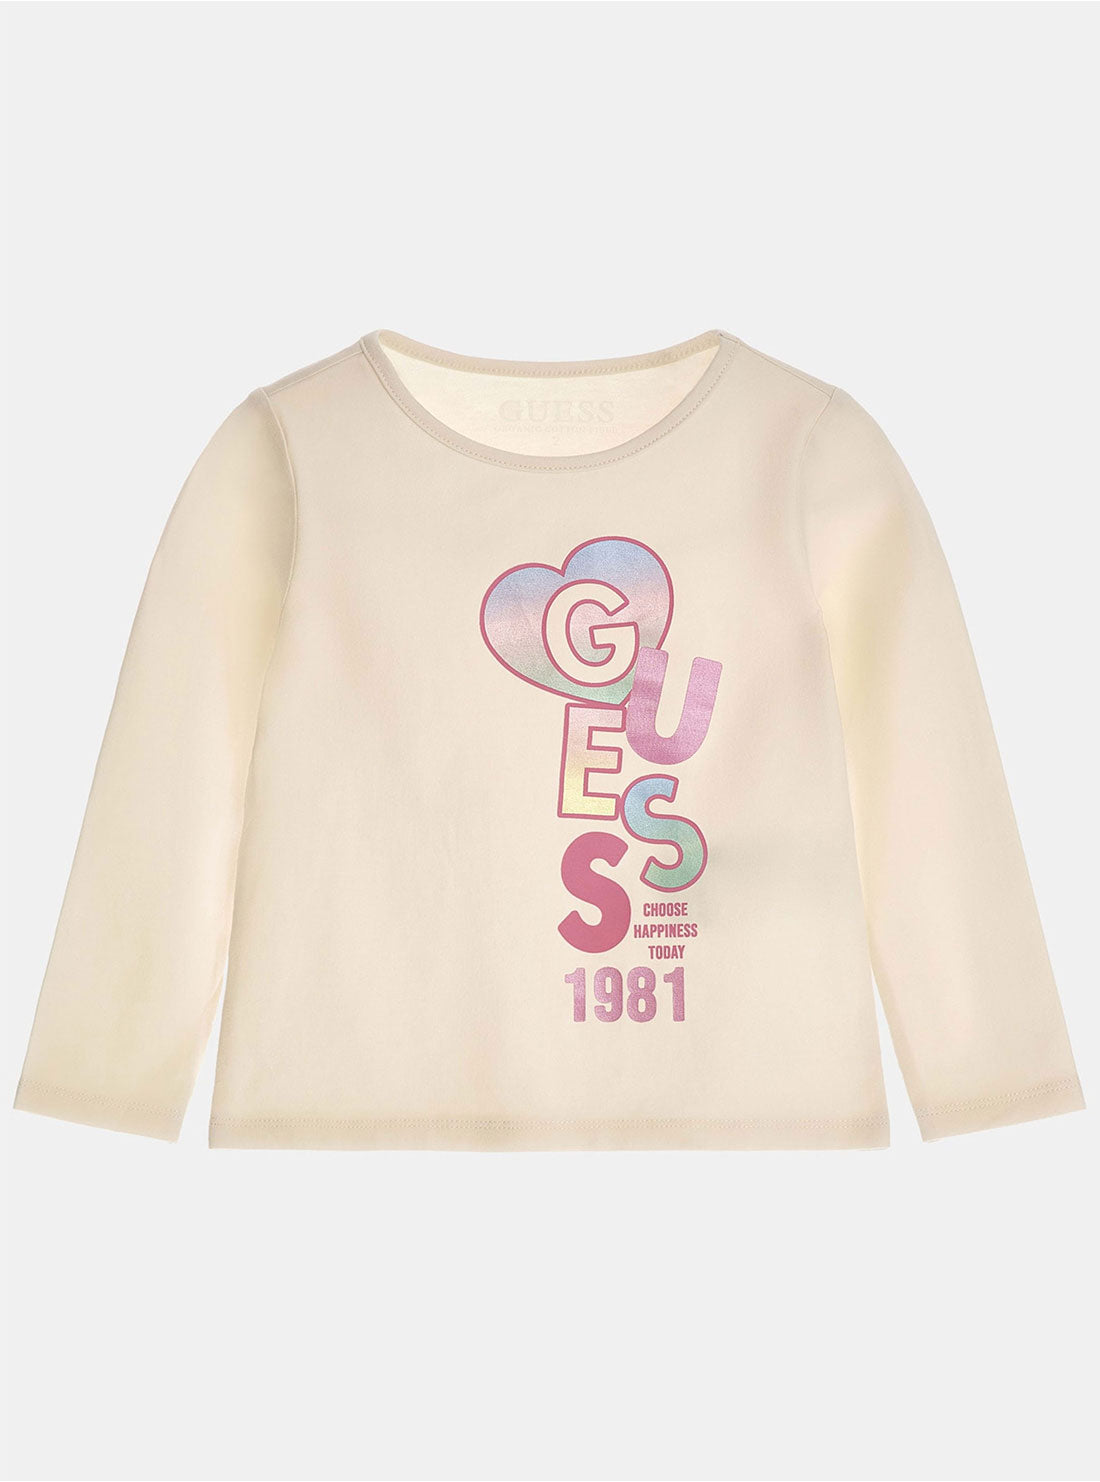 GUESS Beige Long Sleeve T-Shirt (2-7) front view